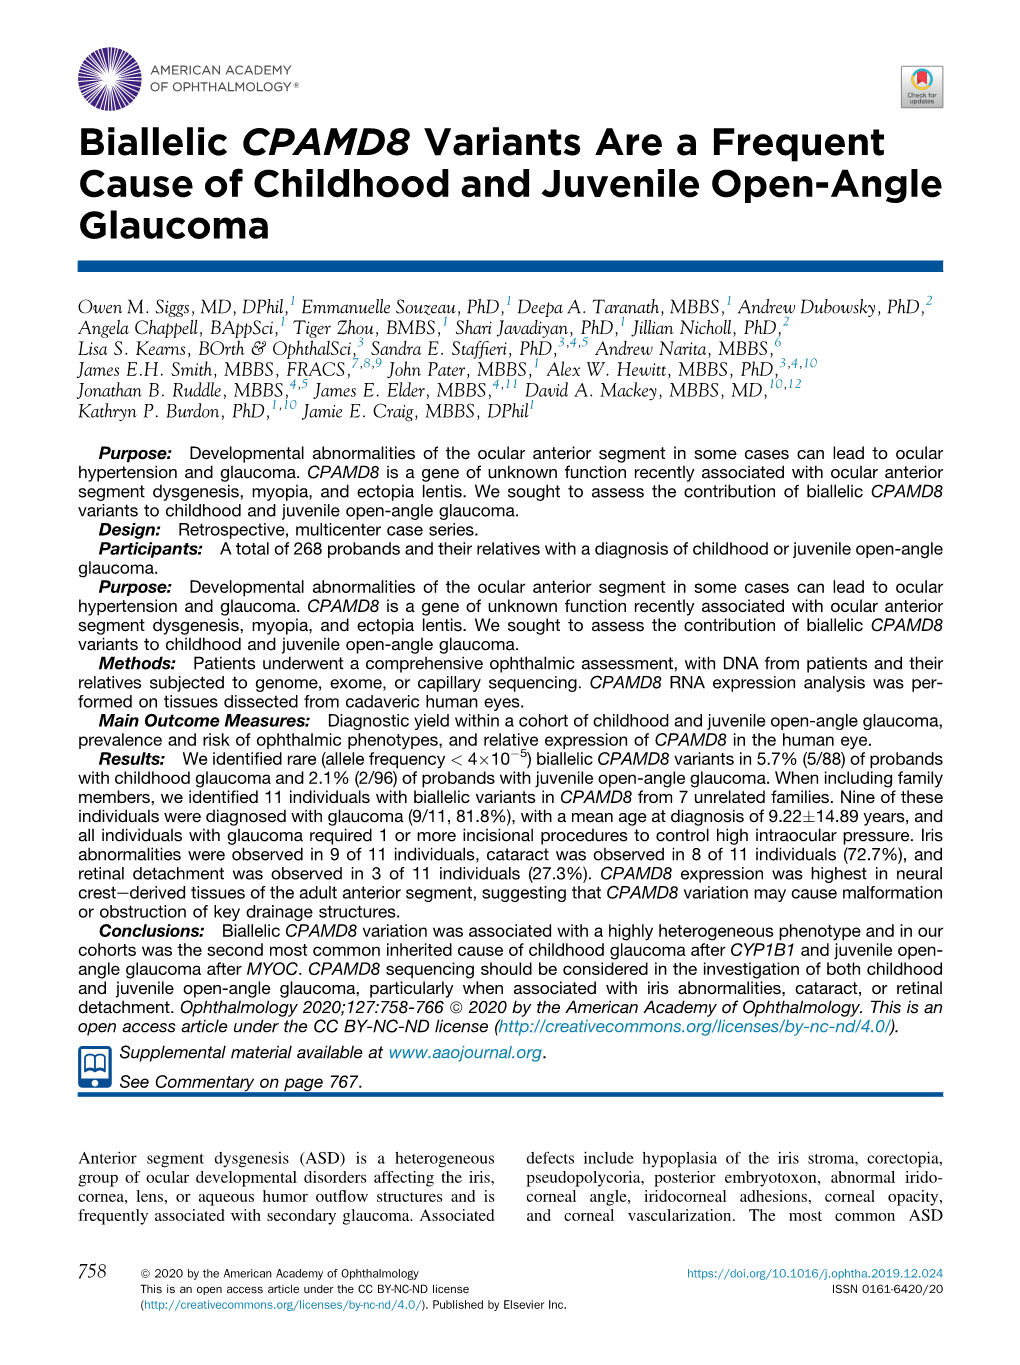 Biallelic CPAMD8 Variants Are a Frequent Cause of Childhood and Juvenile Open-Angle Glaucoma